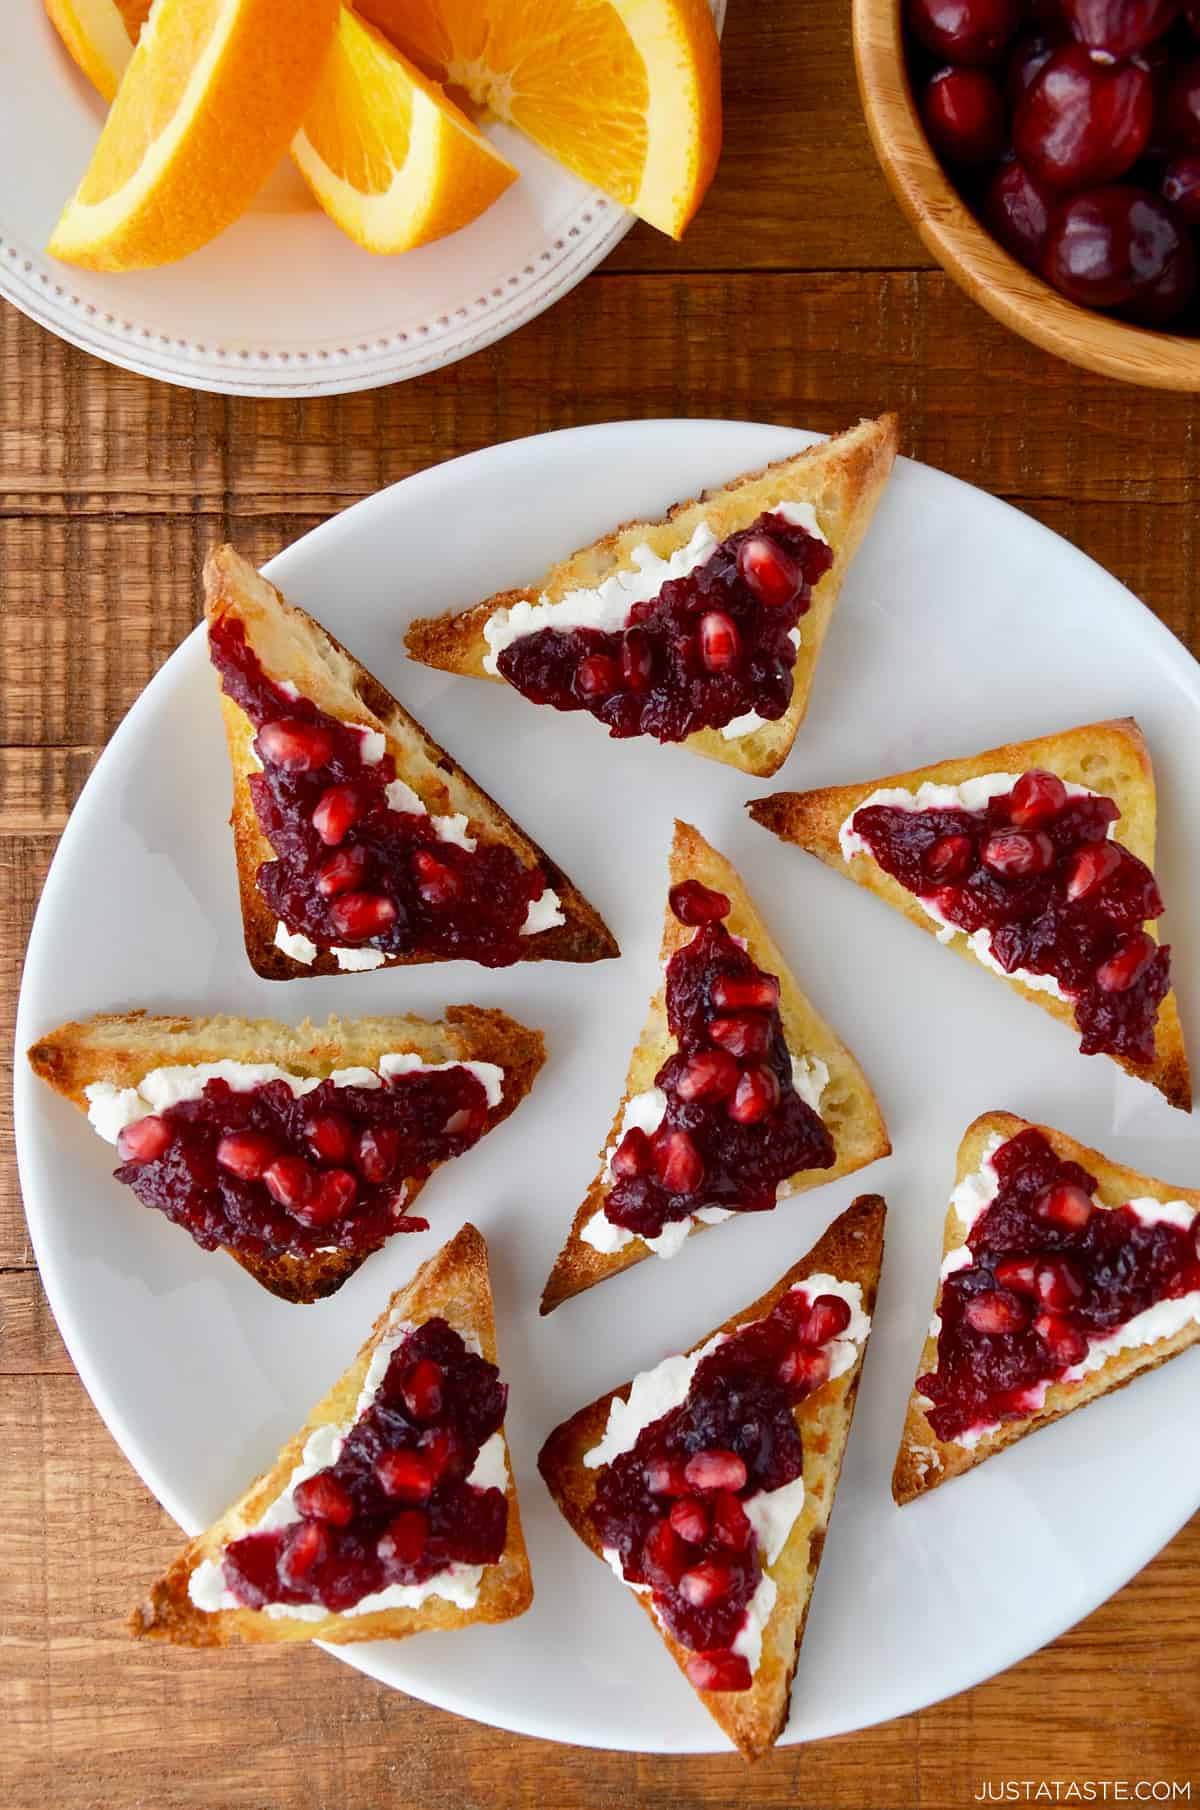 Orange cranberry sauce and pomegranate arils atop goat cheese toast on a white plate.